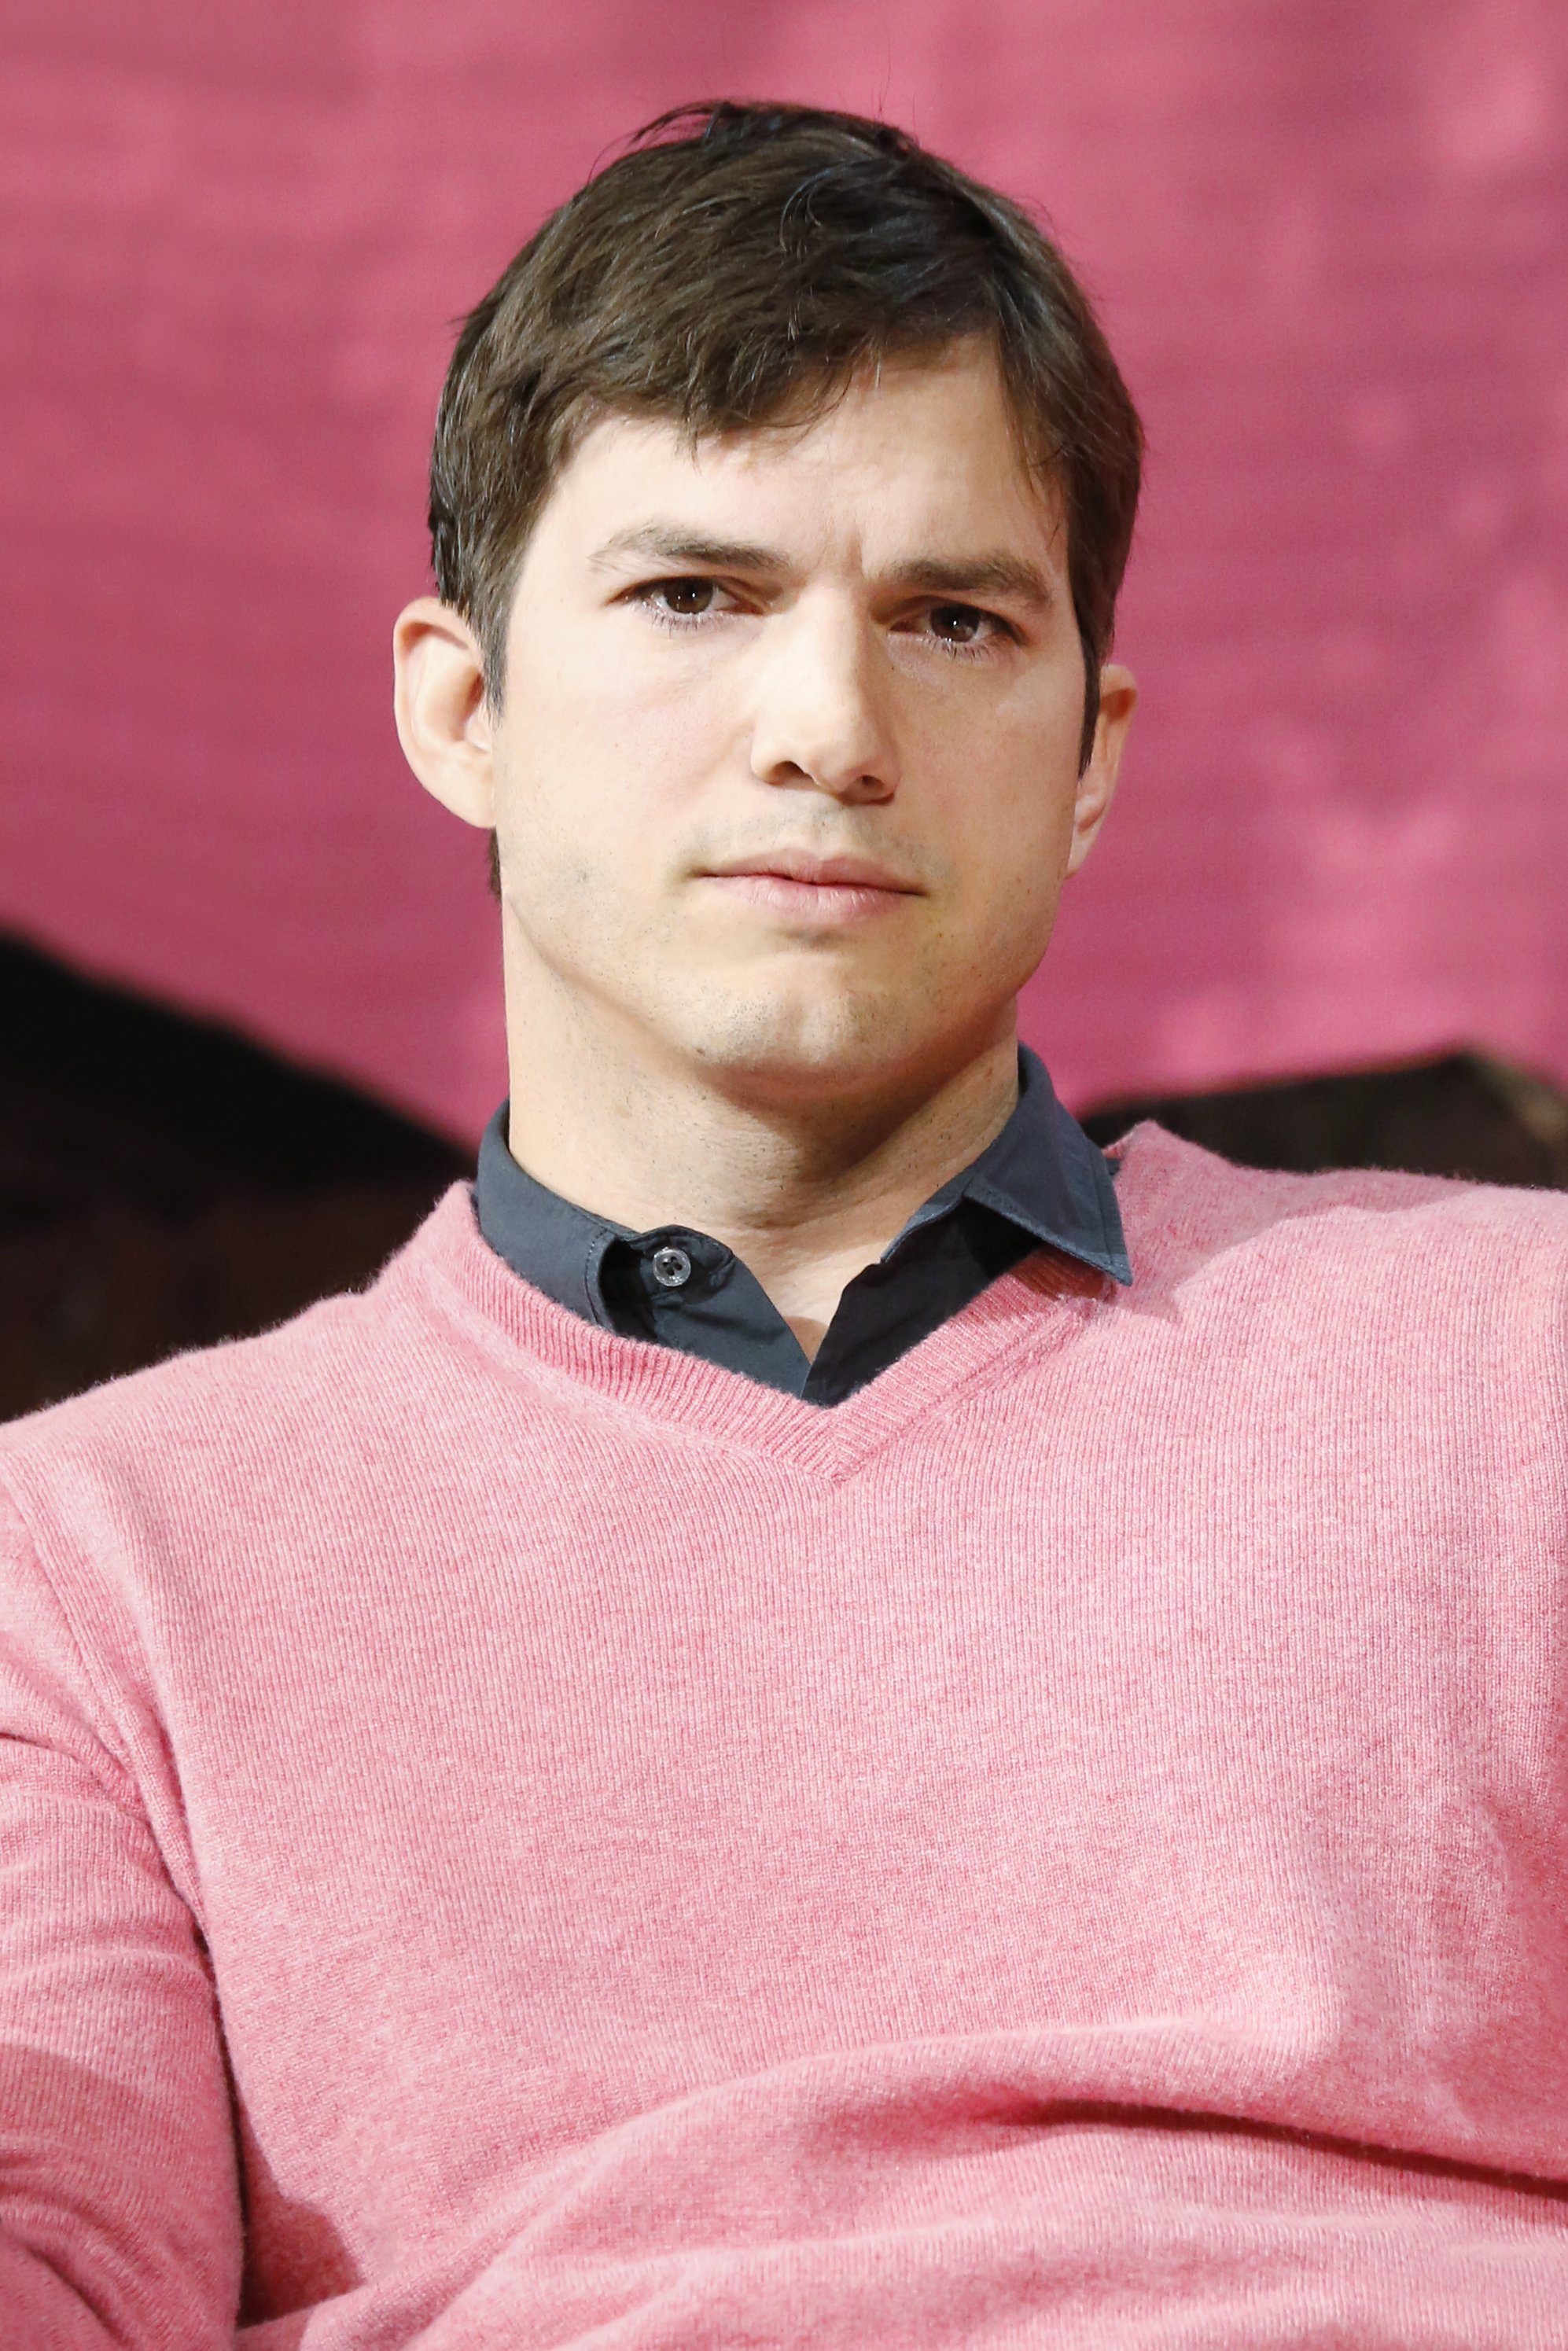  Ashton Kutcher appears on stage during the 'The Game Plan: Strategies for Entrepreneurs' Airbnb Open 2016 on November 19, 2016 in Los Angeles, California. | Source: Getty Images.